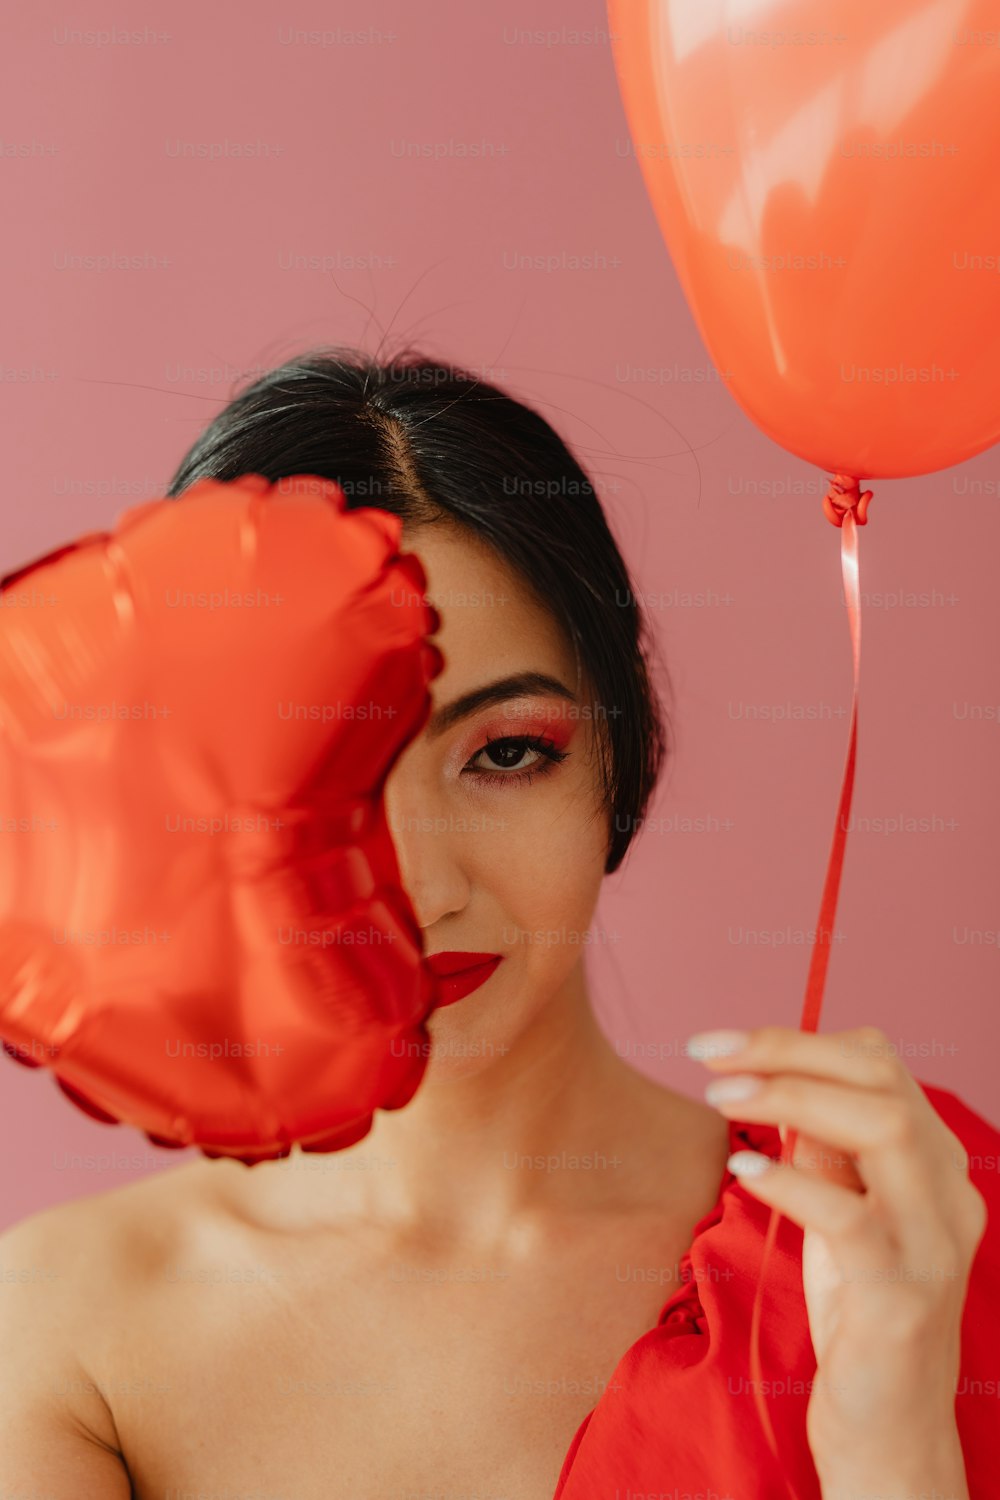 a woman in a red dress holding a red balloon